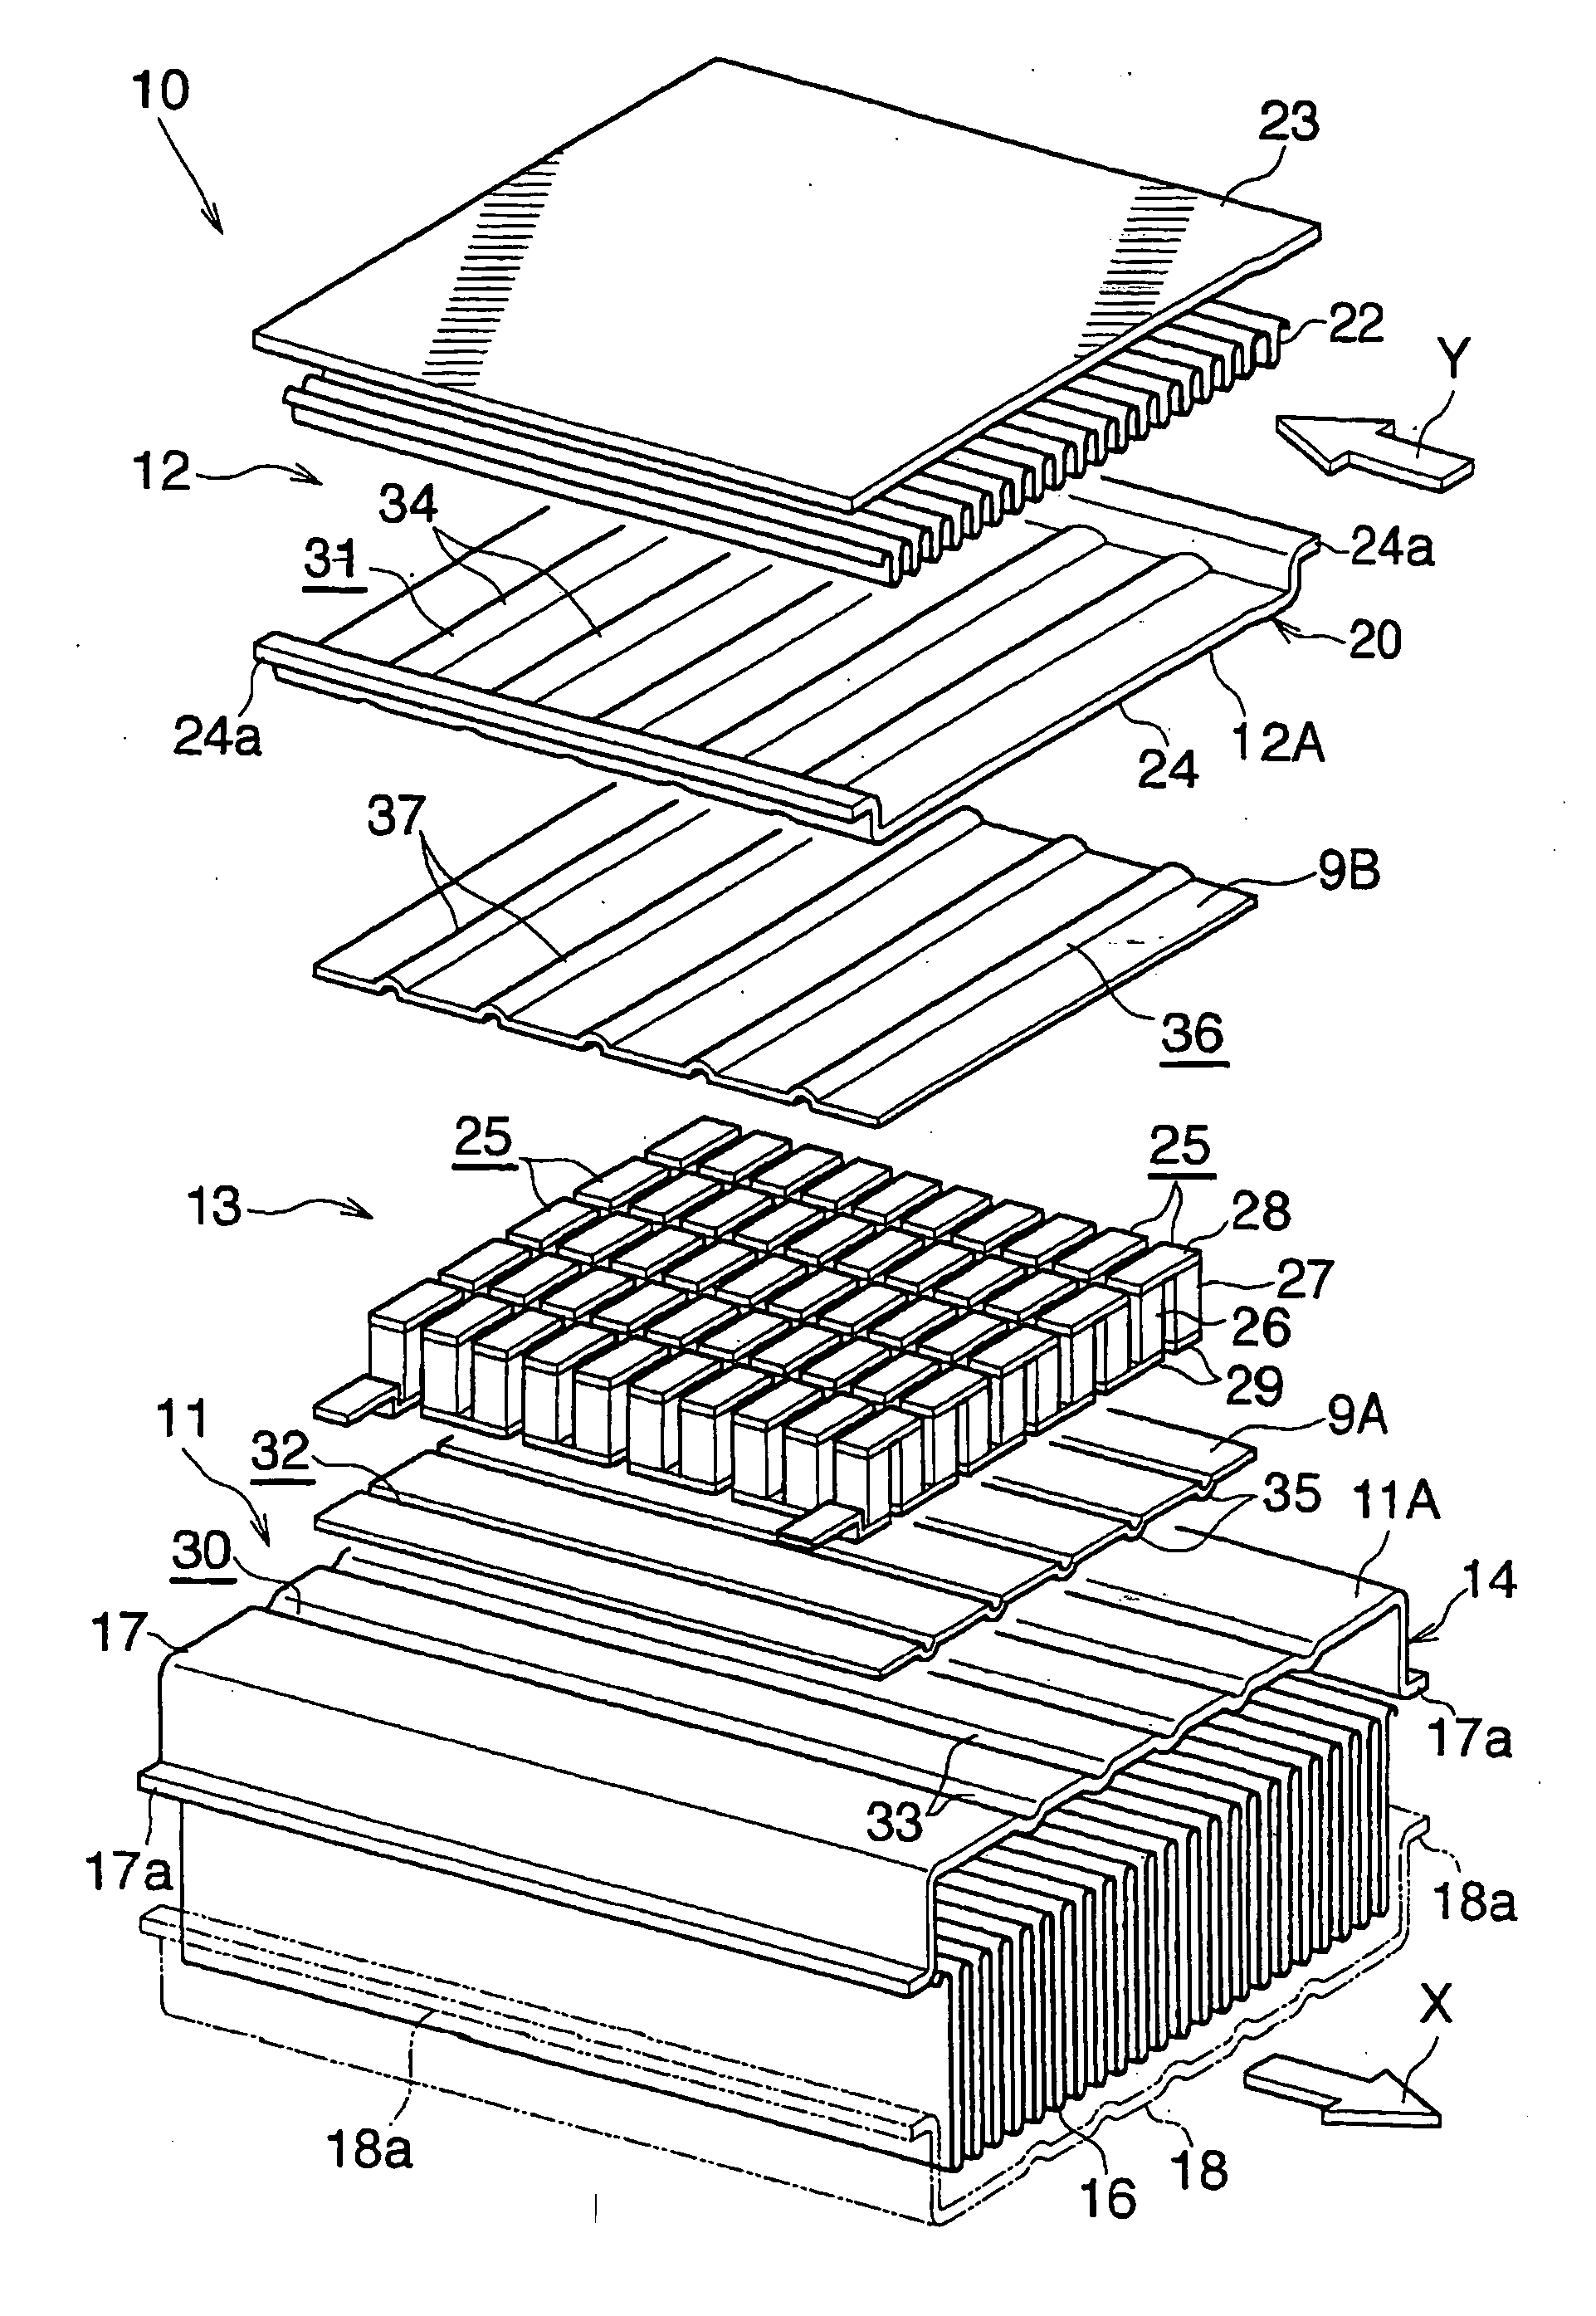 Waste heat recovery system and thermoelectric conversion system